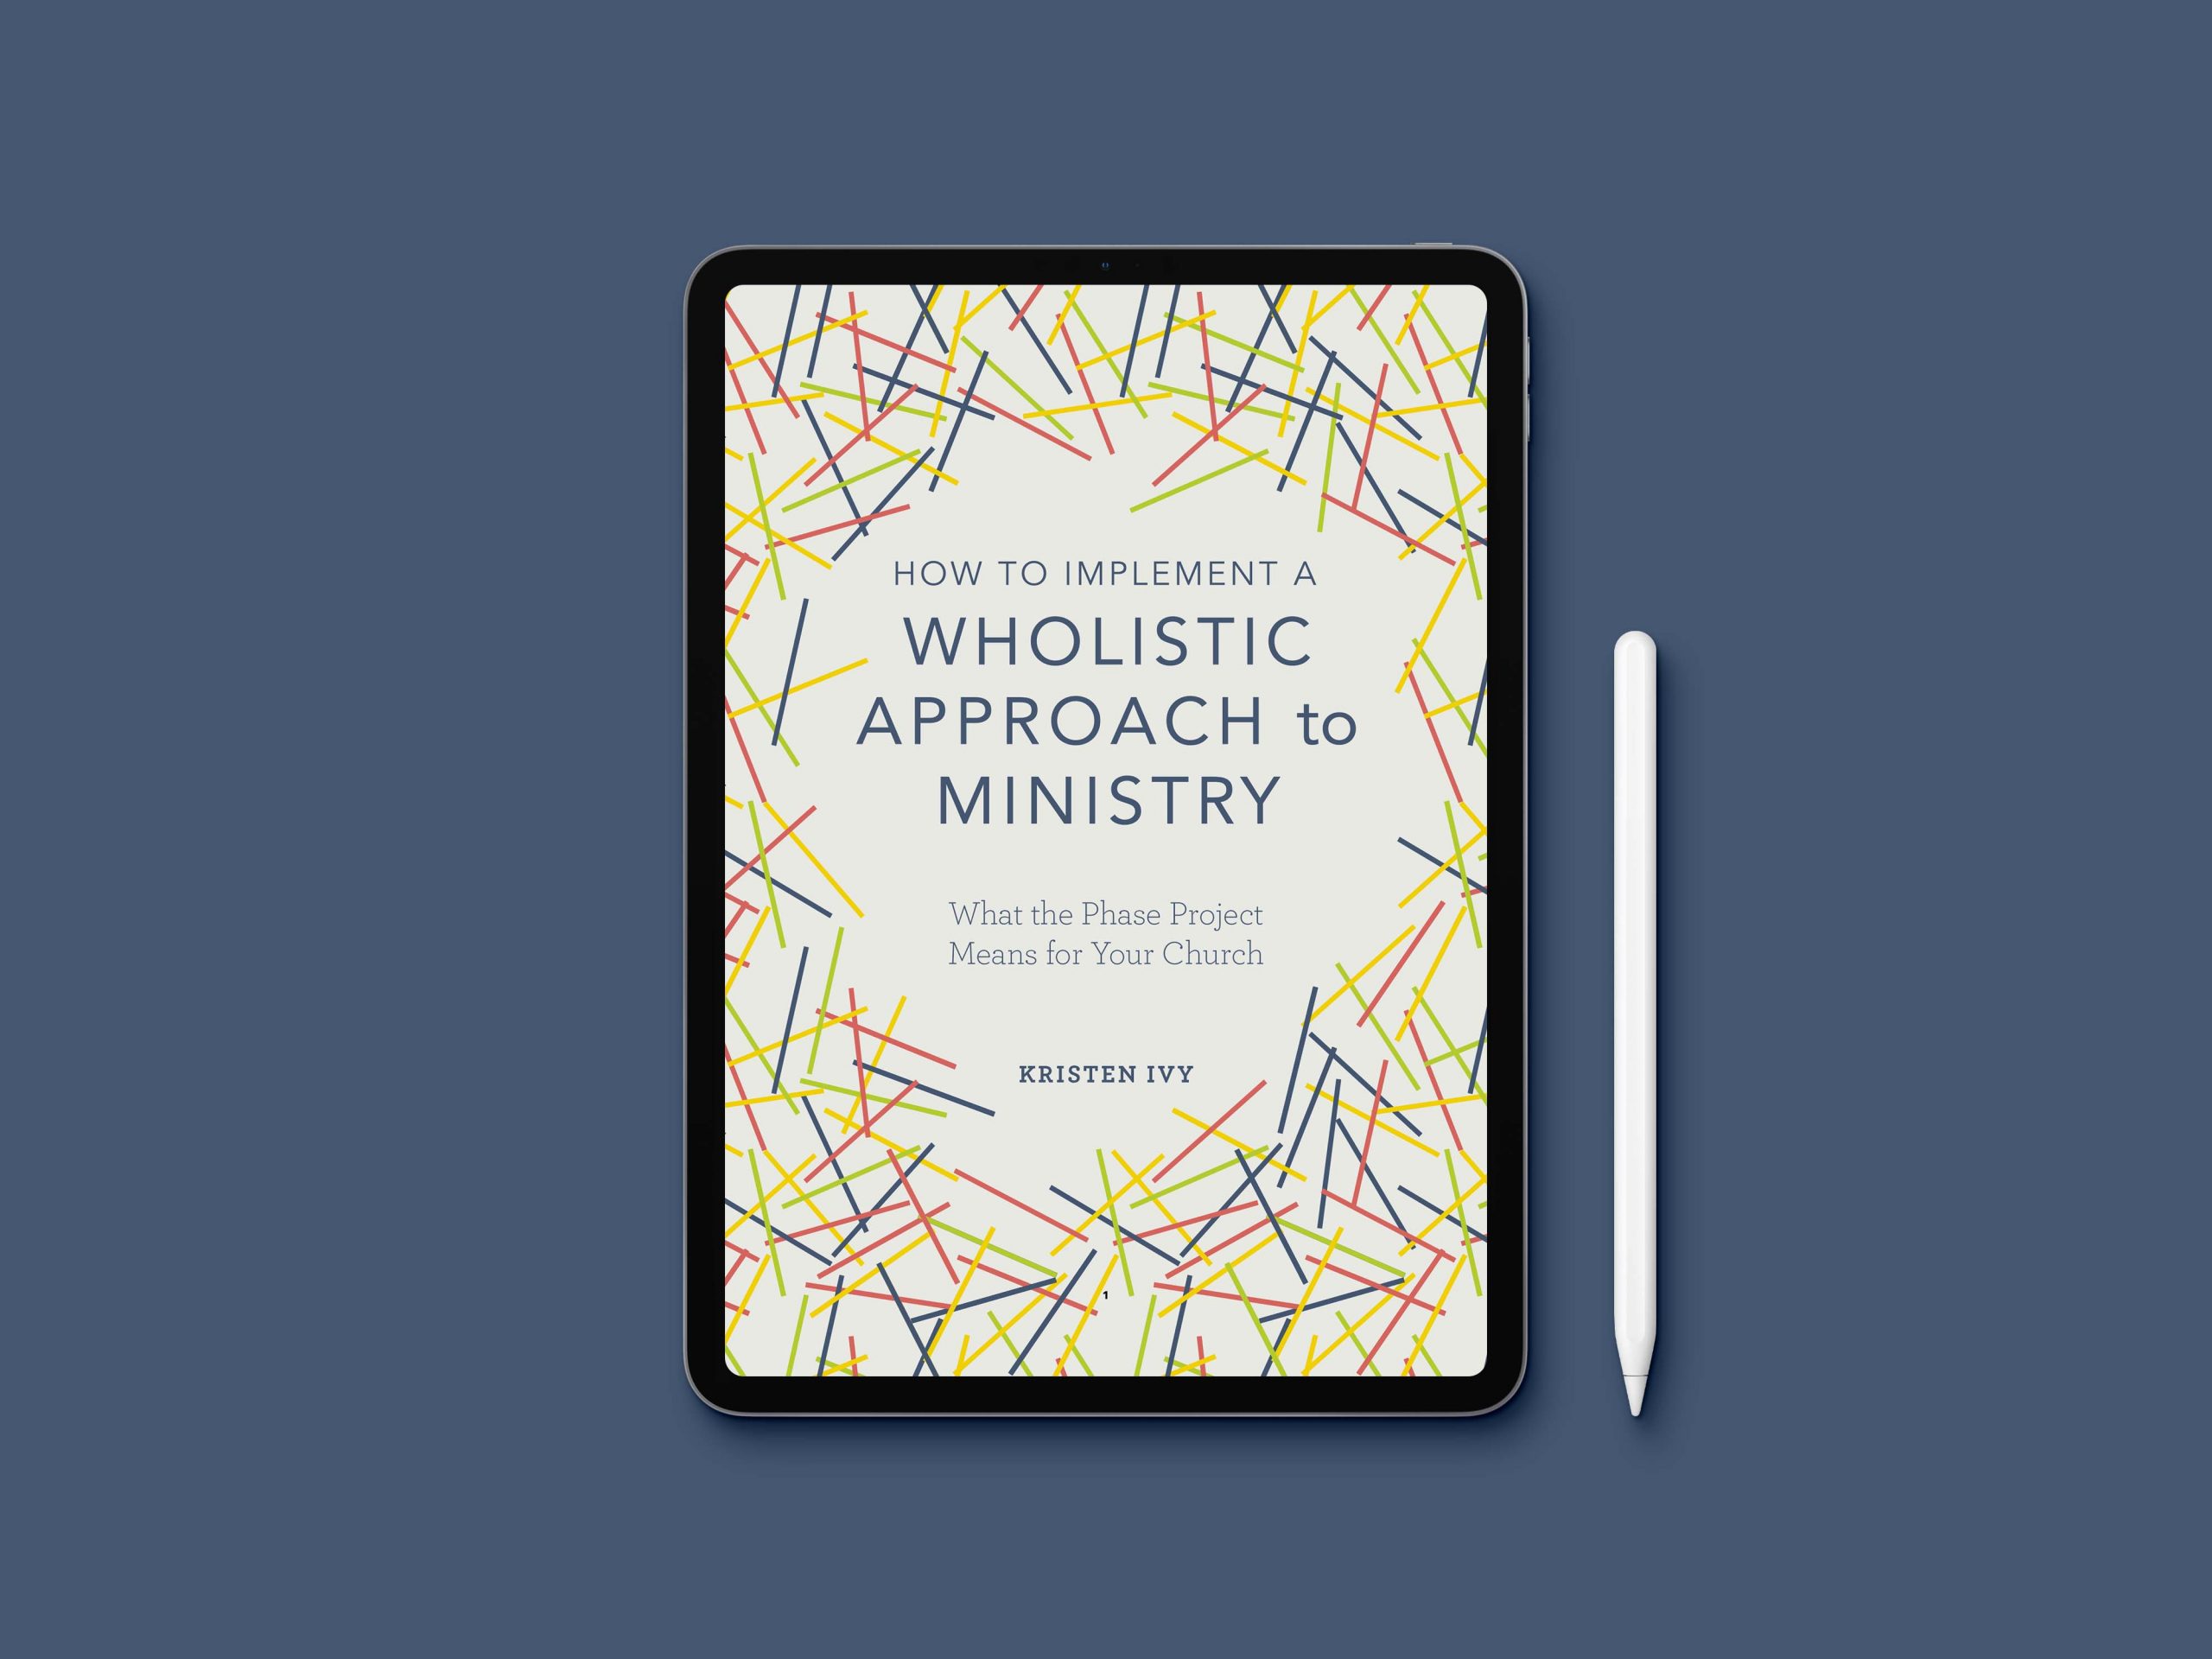 “How to Implement a Wholistic Approach to Ministry” E-book